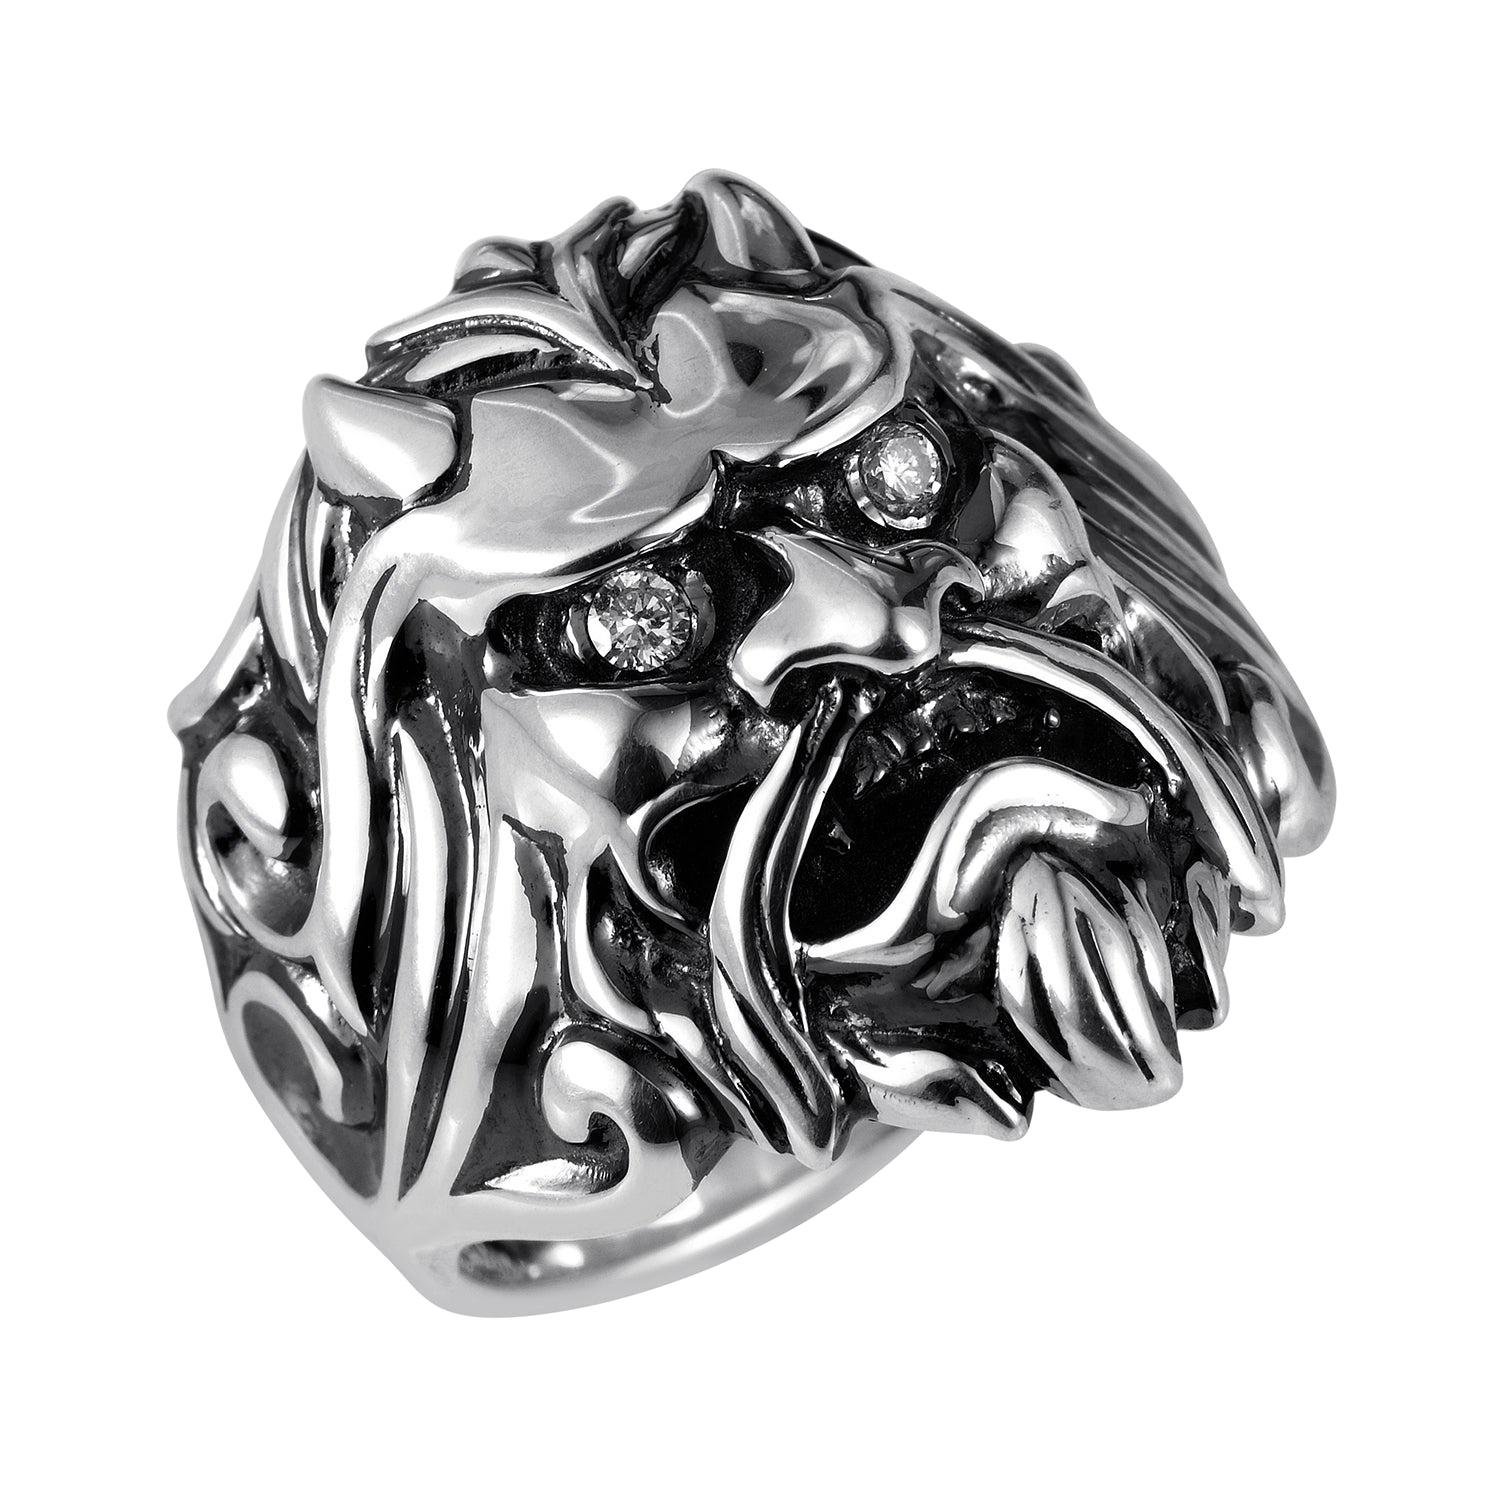 Stephen Webster Sterling Silver and Diamond Japanese Warrior Mask Ring